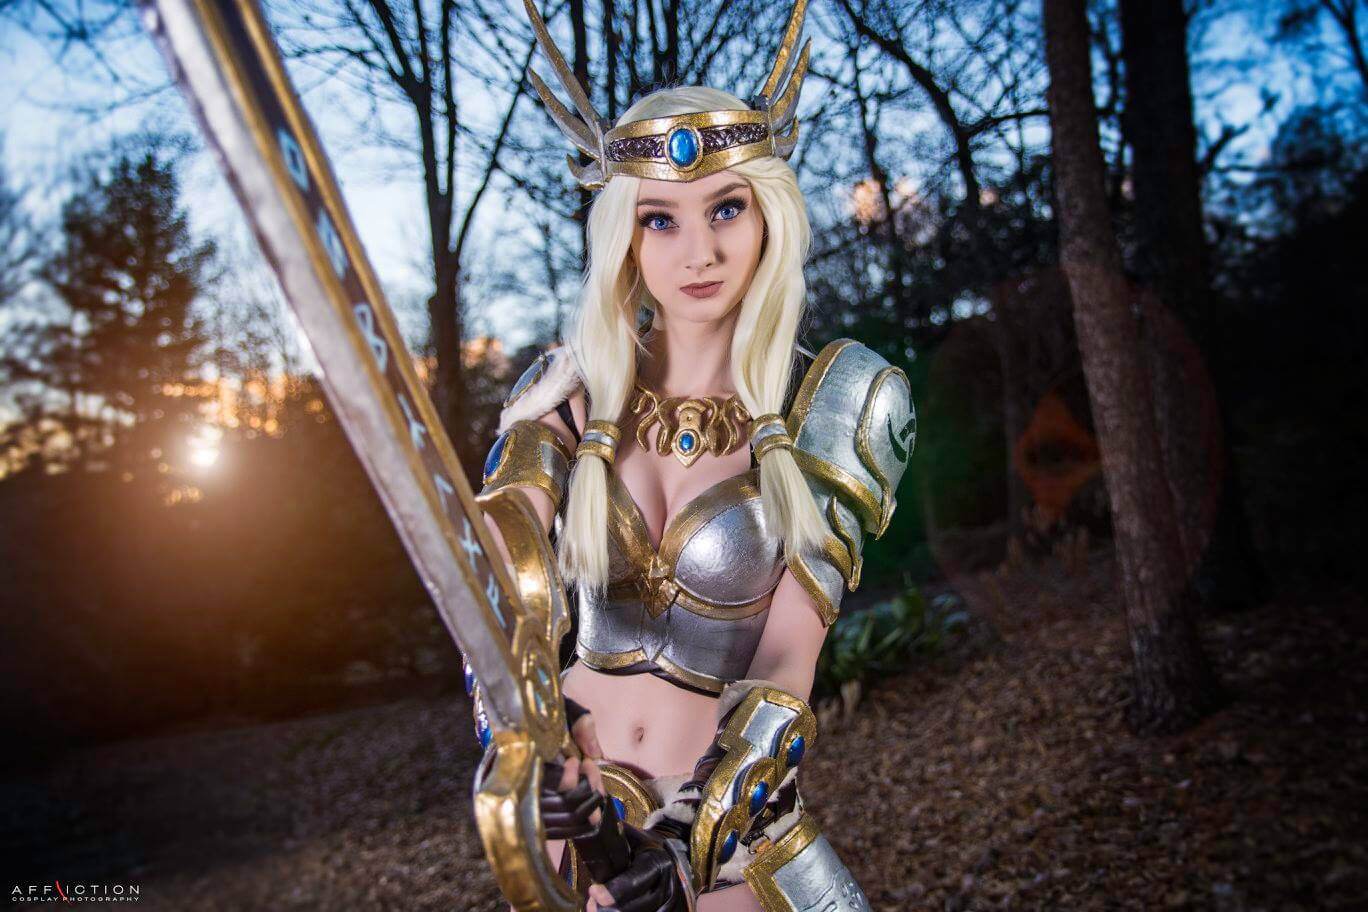 49 Hot Pictures Of Freya Smite Which Will Make You Fall In Love With Her Sexy Body | Best Of Comic Books